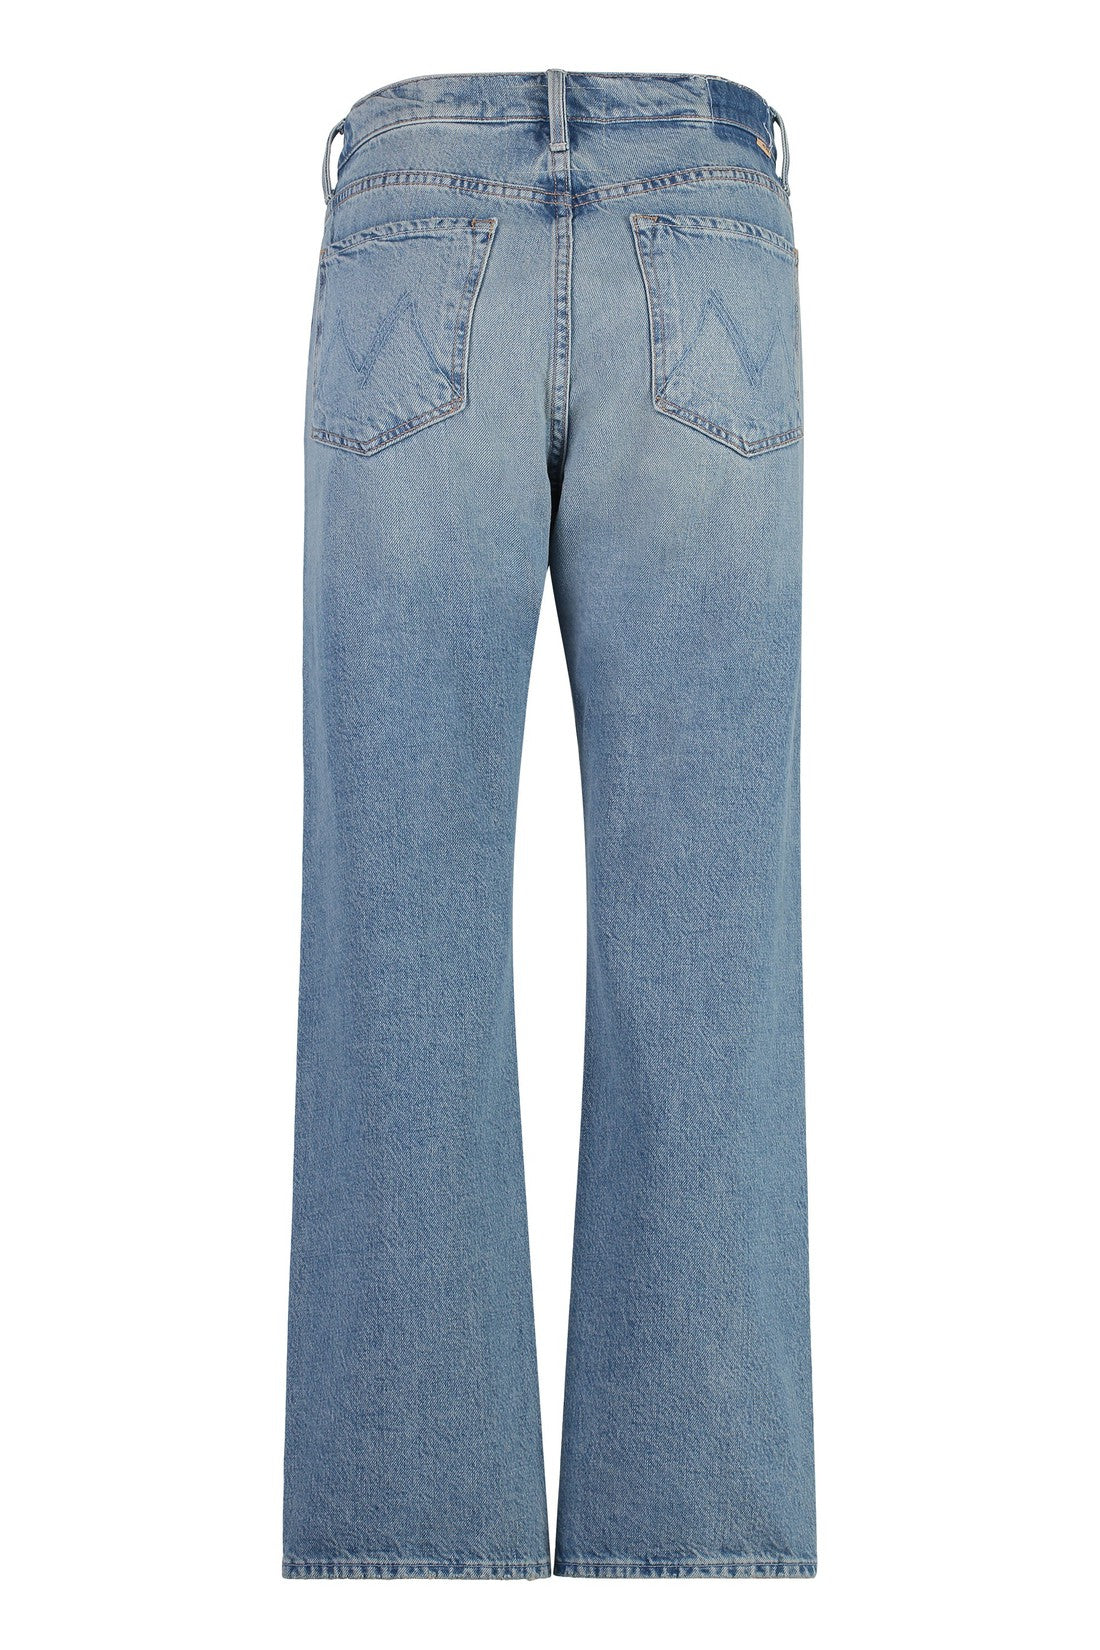 Mother-OUTLET-SALE-The Ditcher Hover cropped jeans-ARCHIVIST